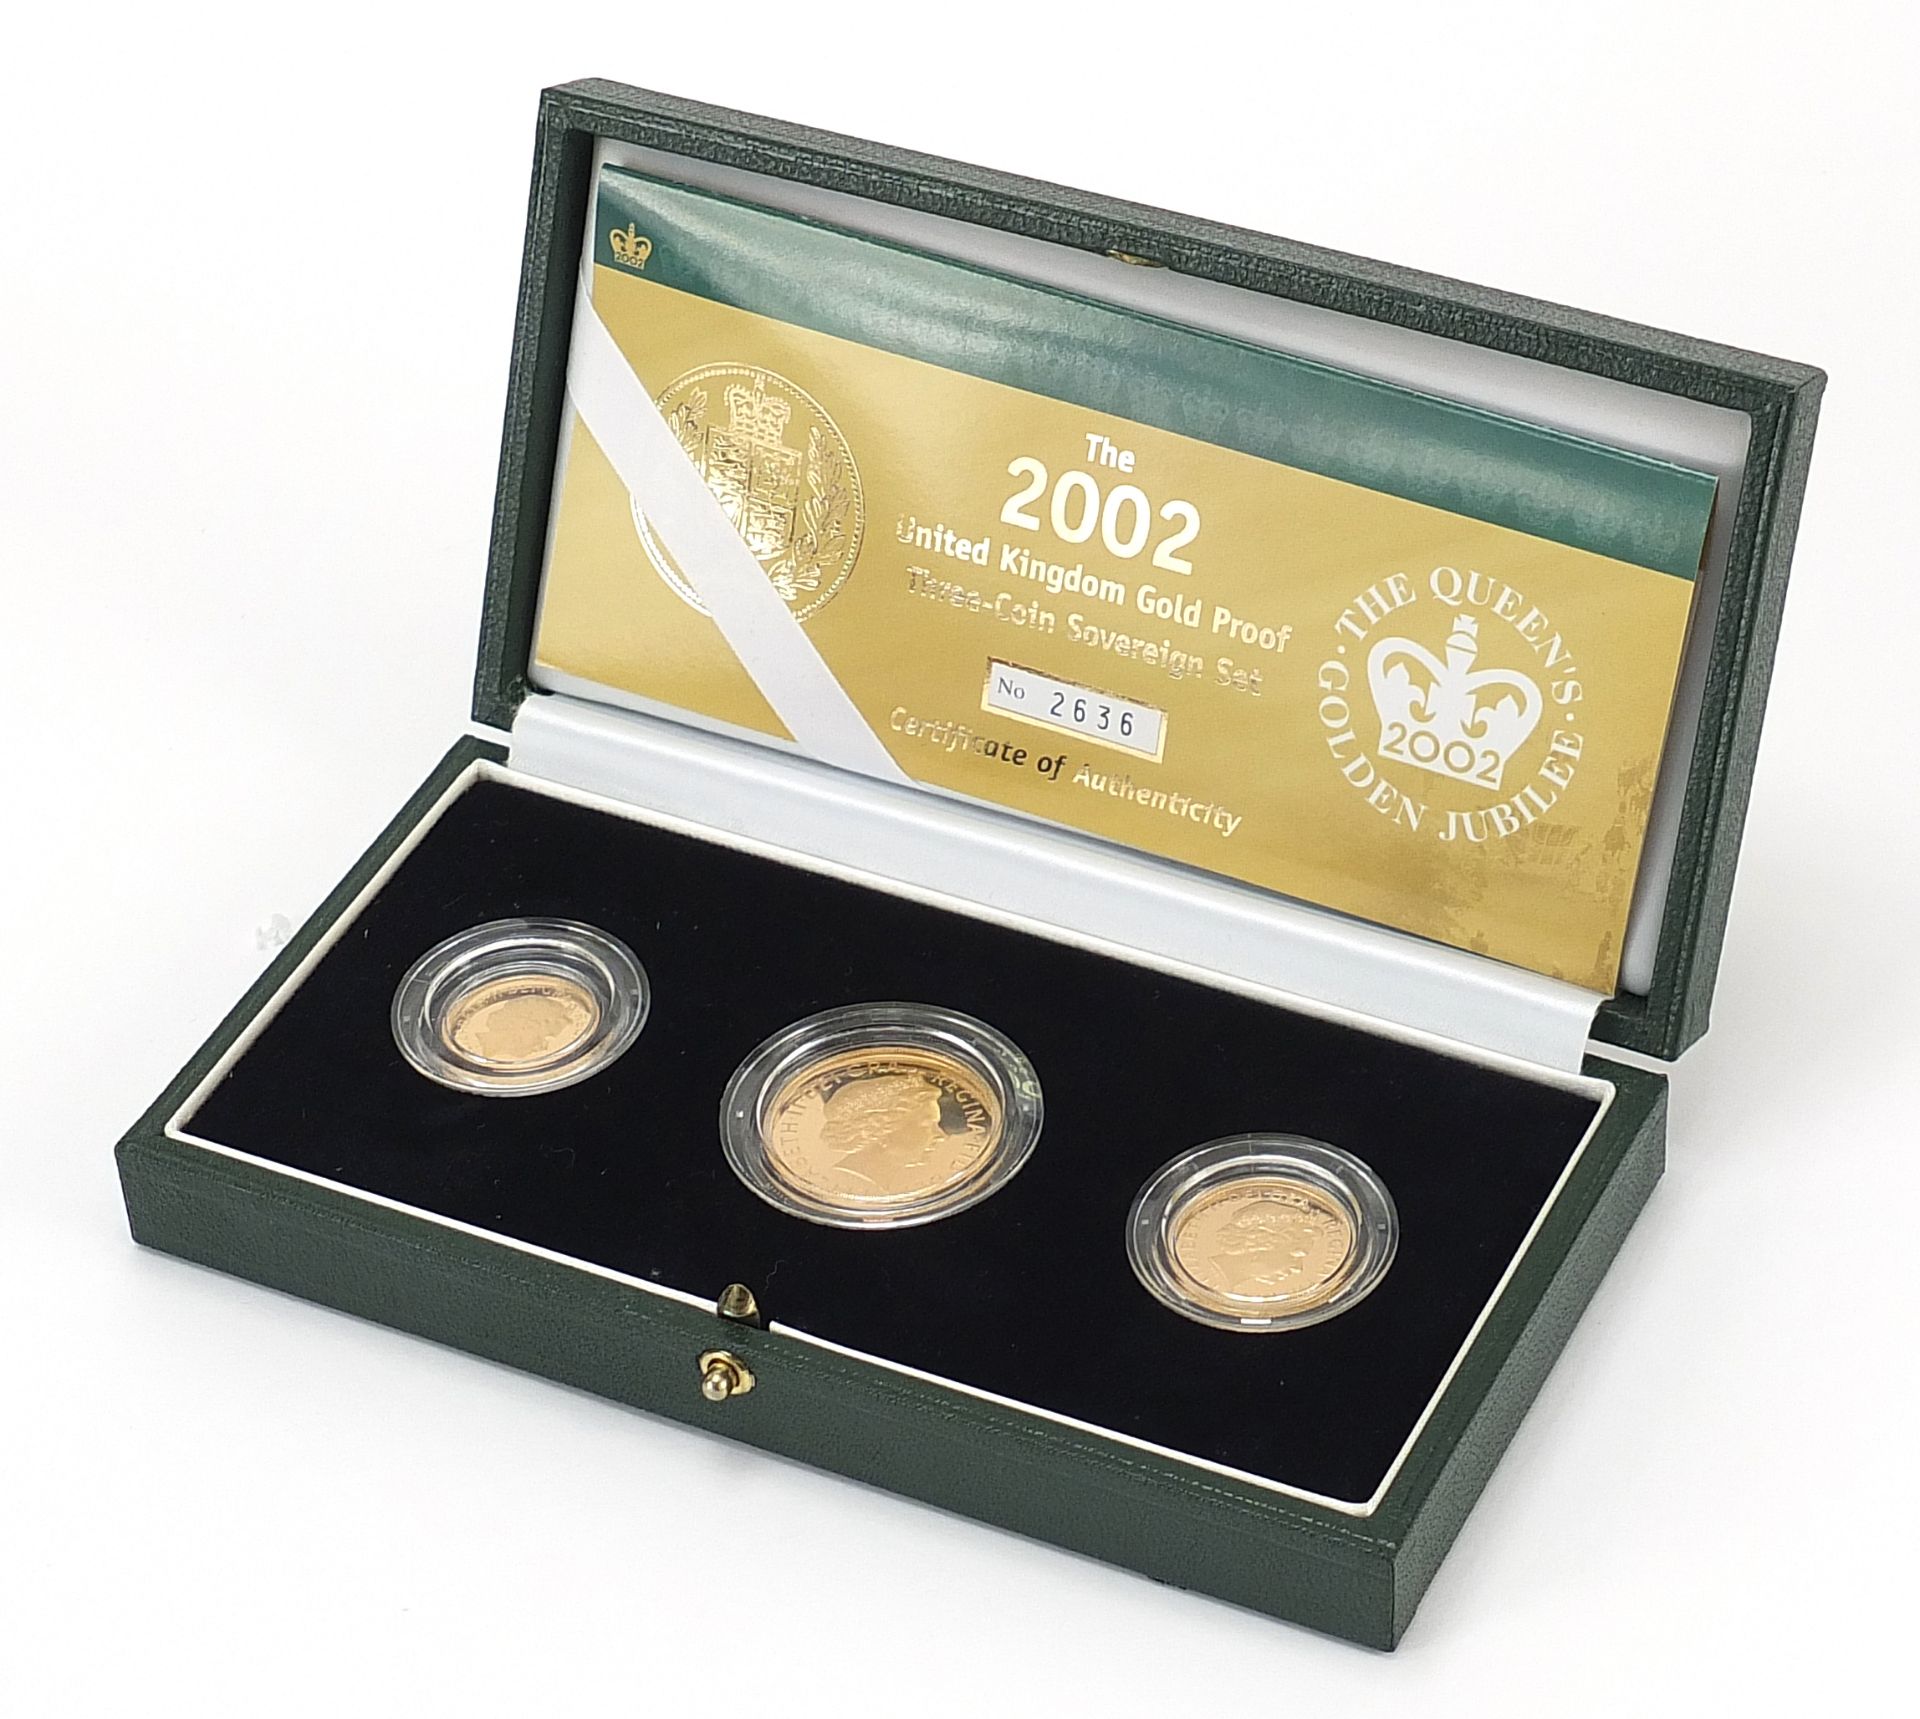 Elizabet II 2002 gold proof three coin sovereign set with box and certificate, comprising Two Pound